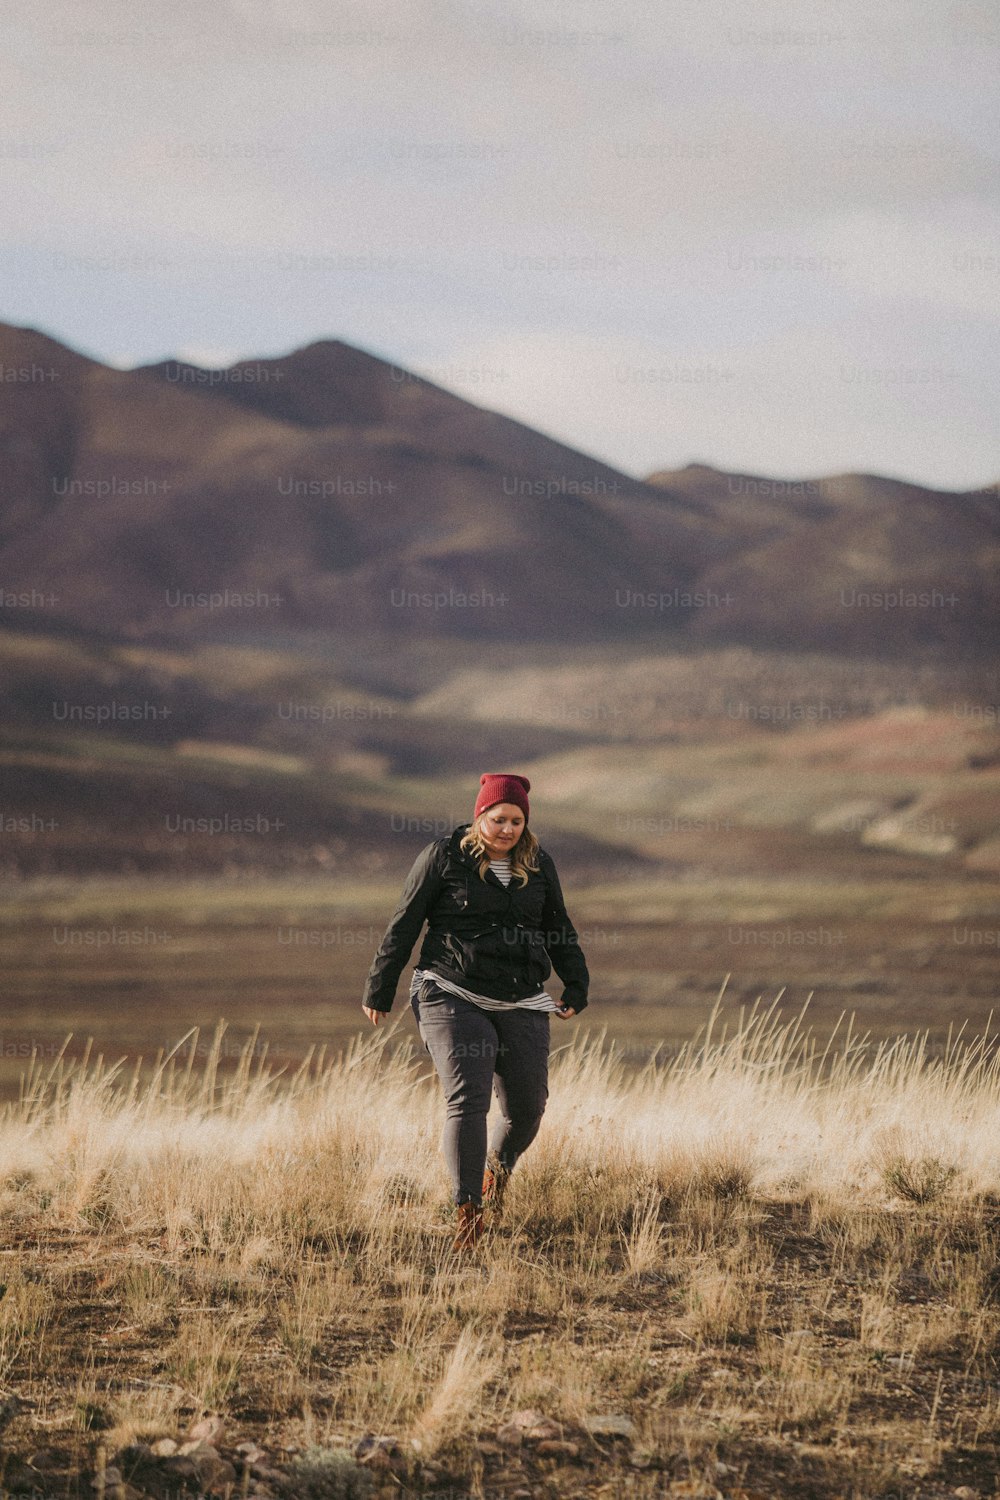 a woman walking across a dry grass covered field